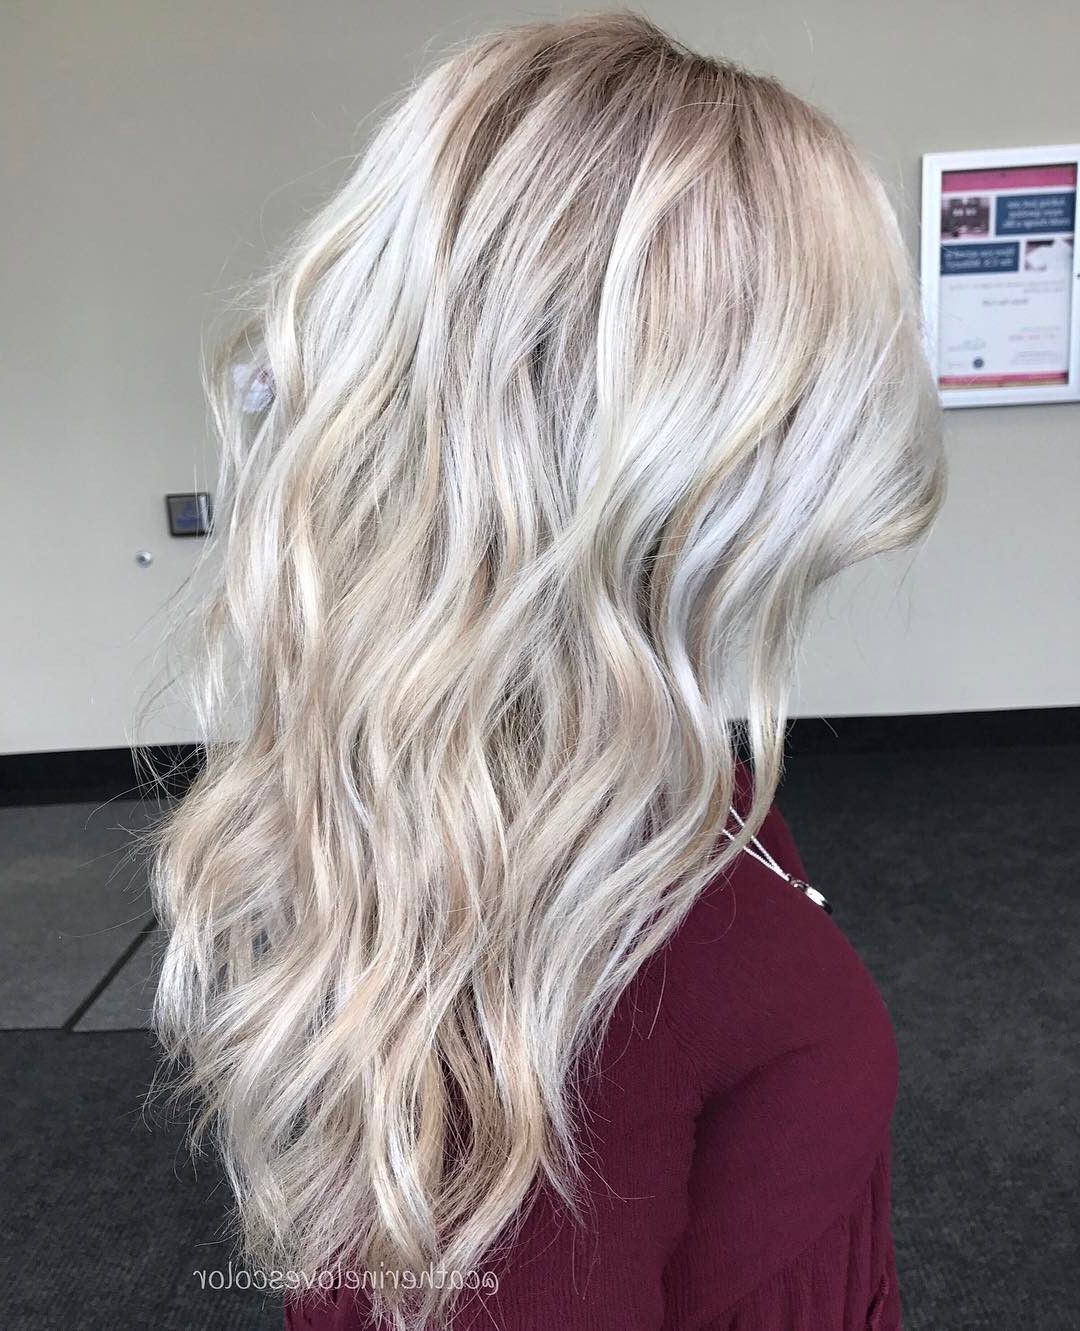 20 Adorable Ash Blonde Hairstyles To Try: Hair Color Ideas 2018 Throughout White Blonde Curly Layered Bob Hairstyles (View 20 of 25)